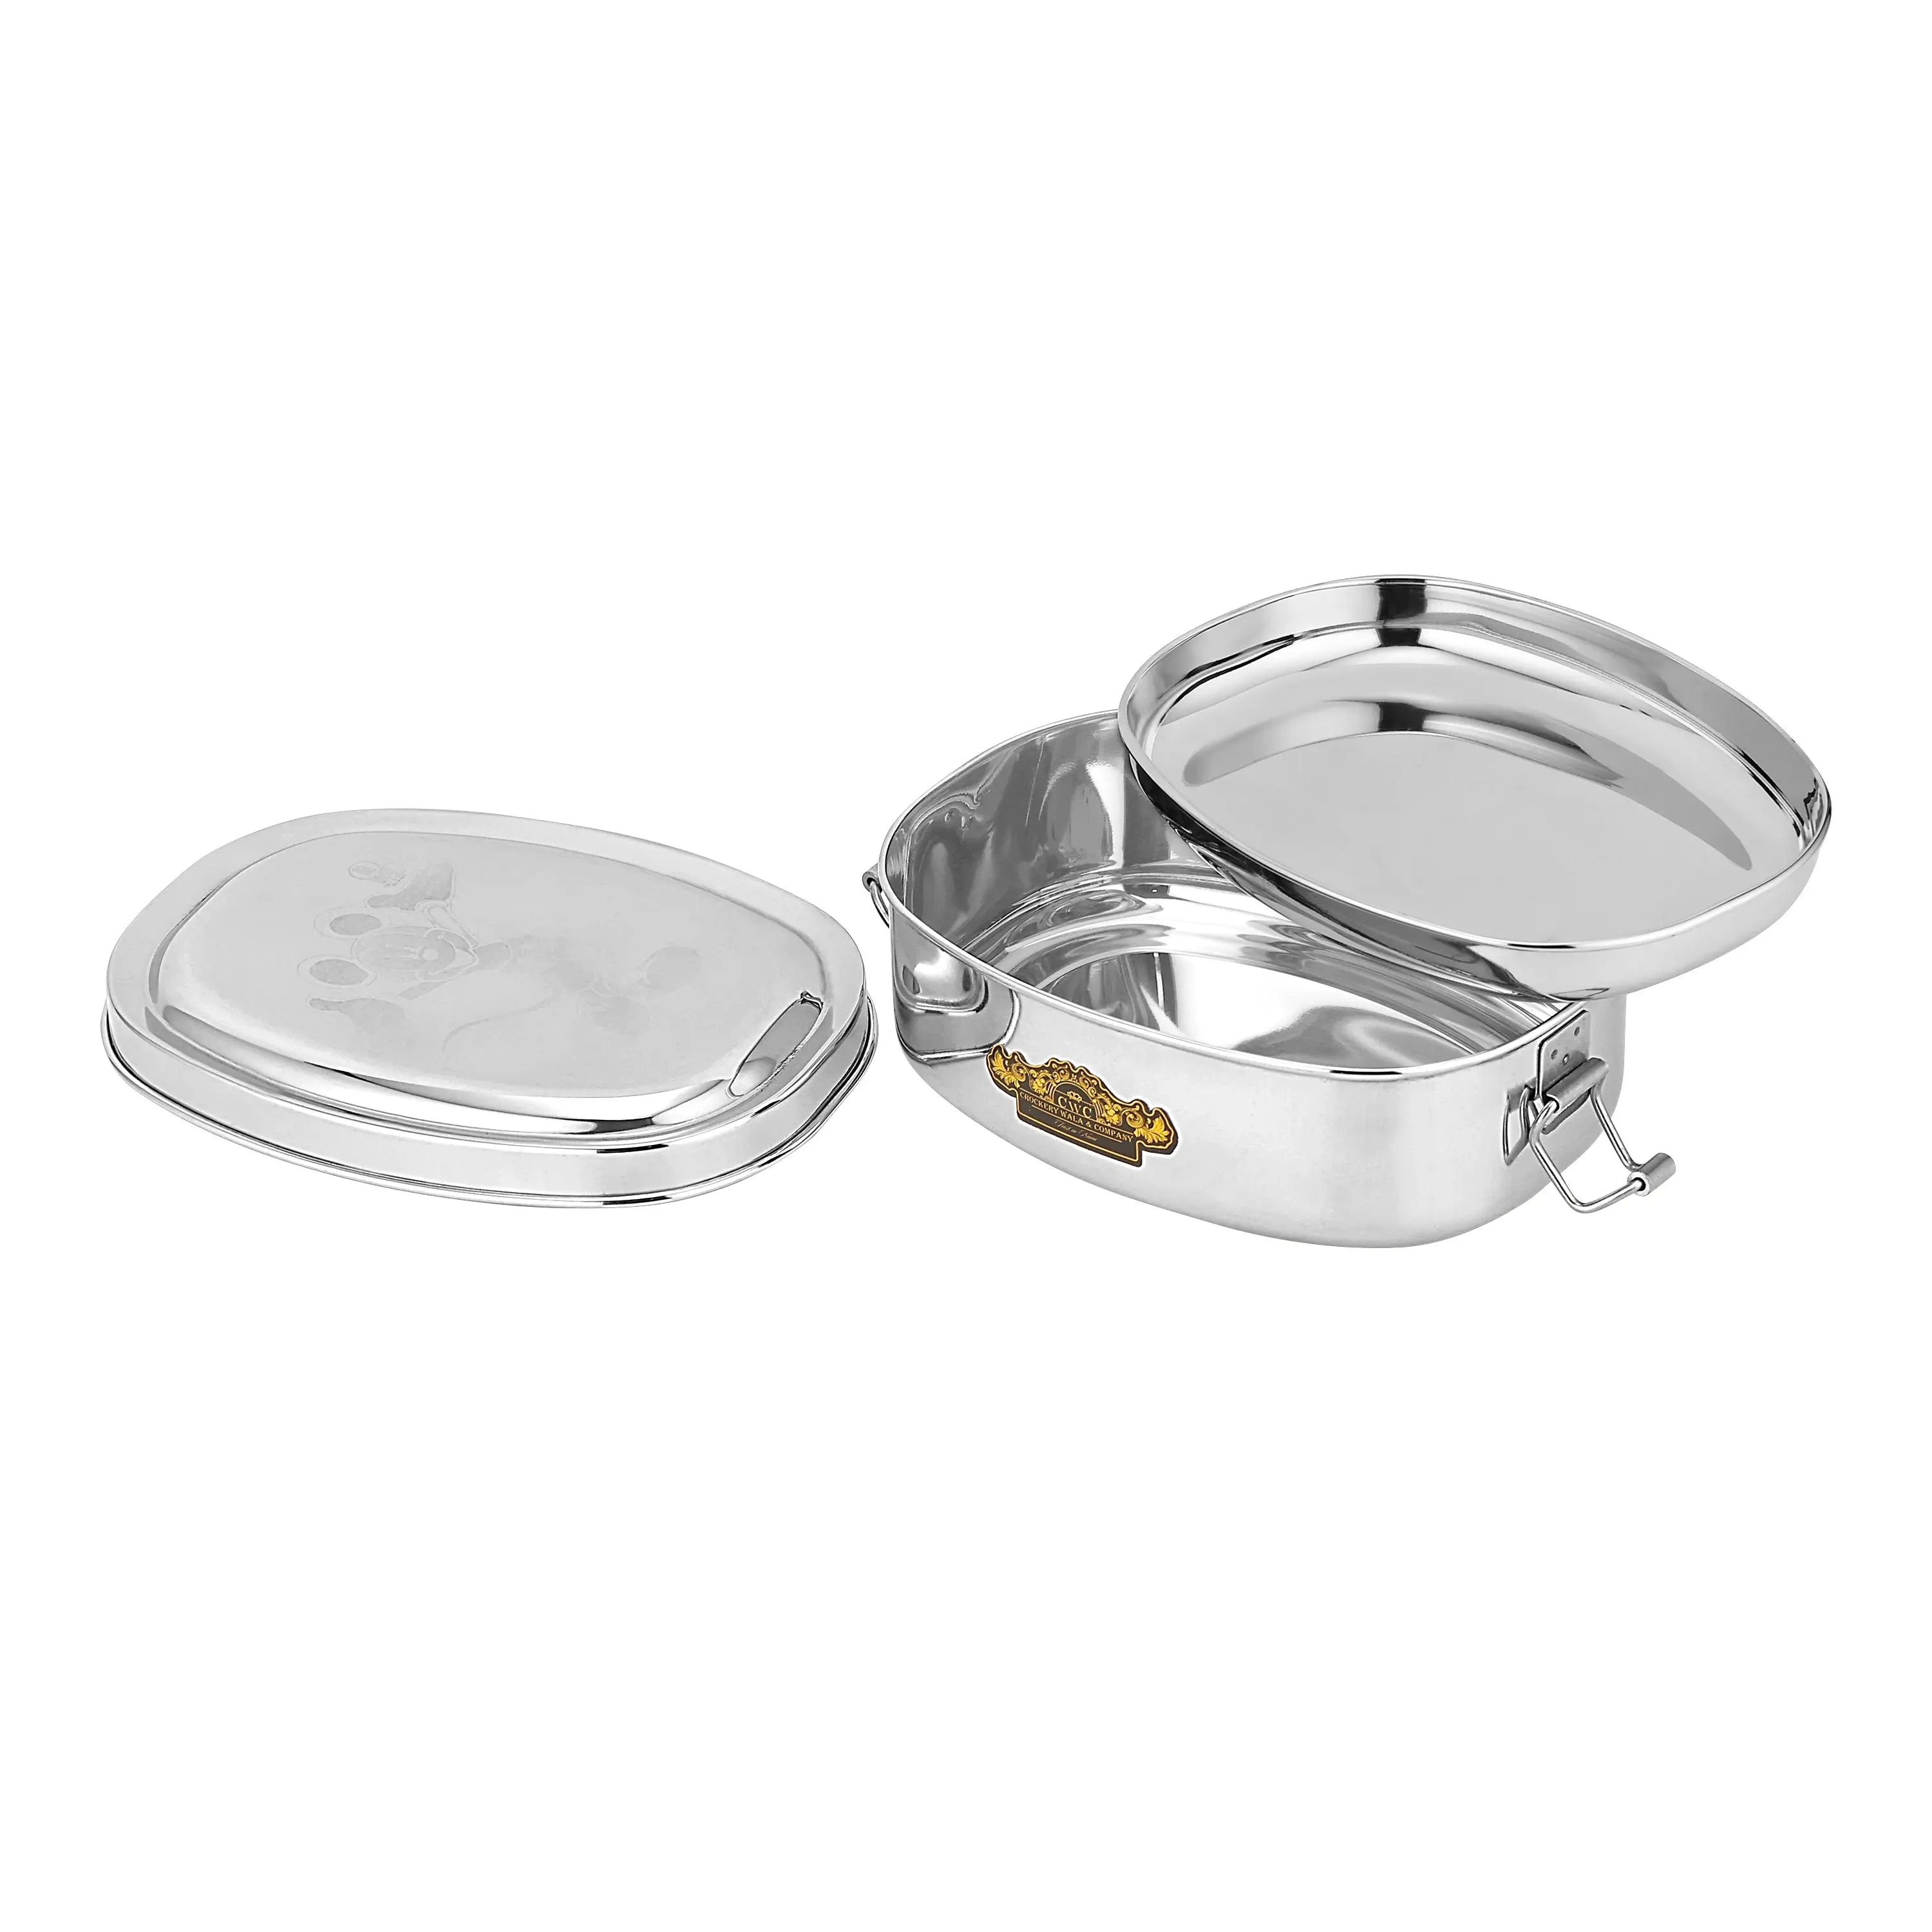 STAINLESS STEEL TABLE LUNCH BOX - CROCKERY WALA AND COMPANY 